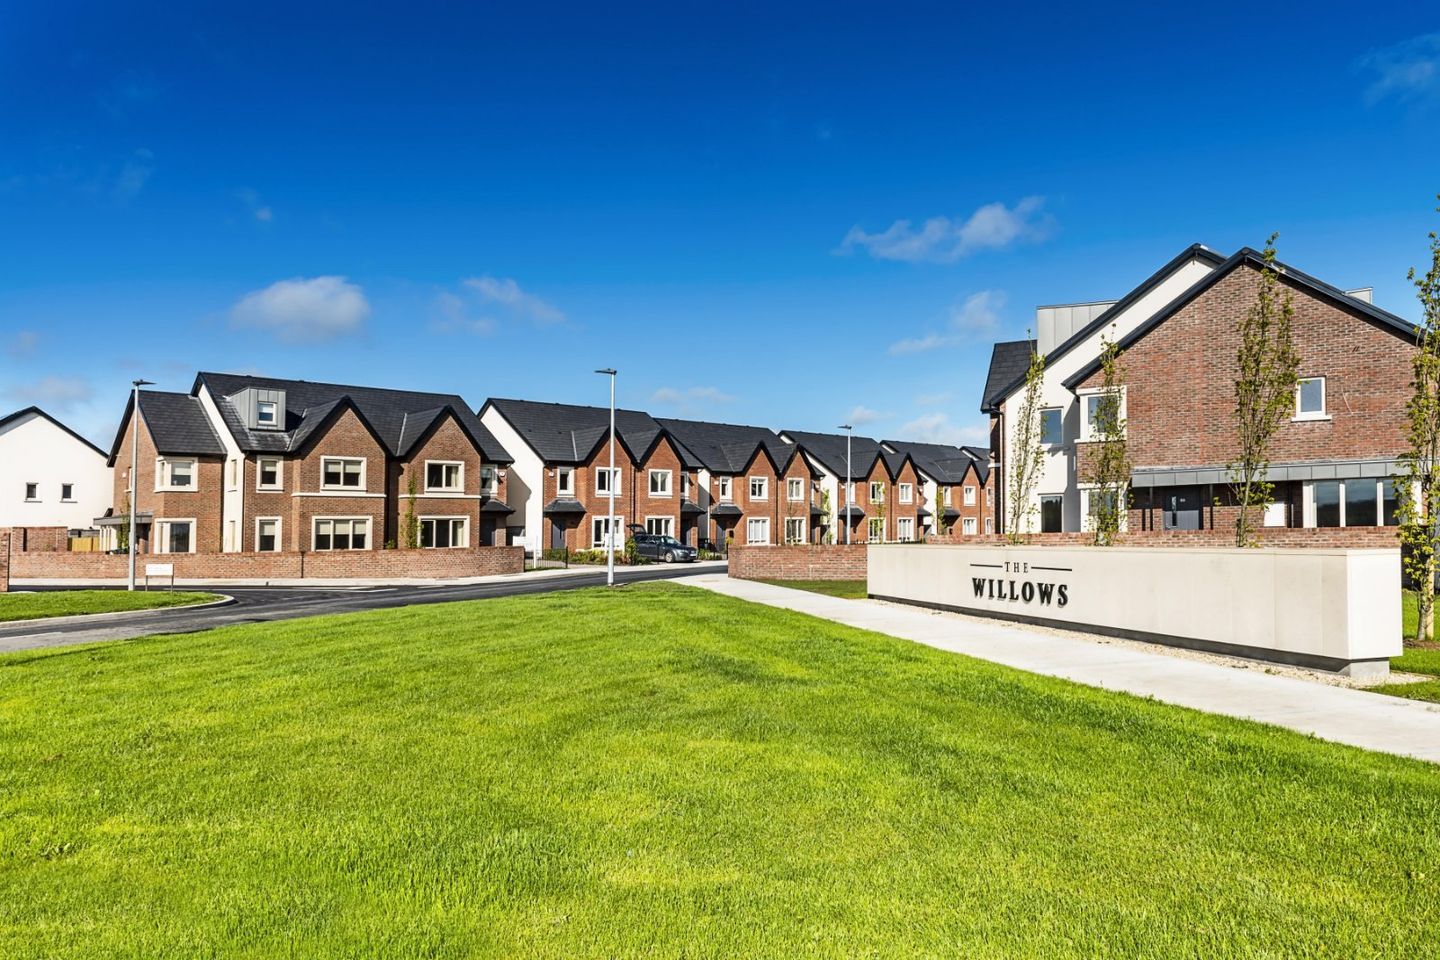 The Willows, The Willows Development, The Willows Development, The Willows Development, Dunshaughlin, Co. Meath